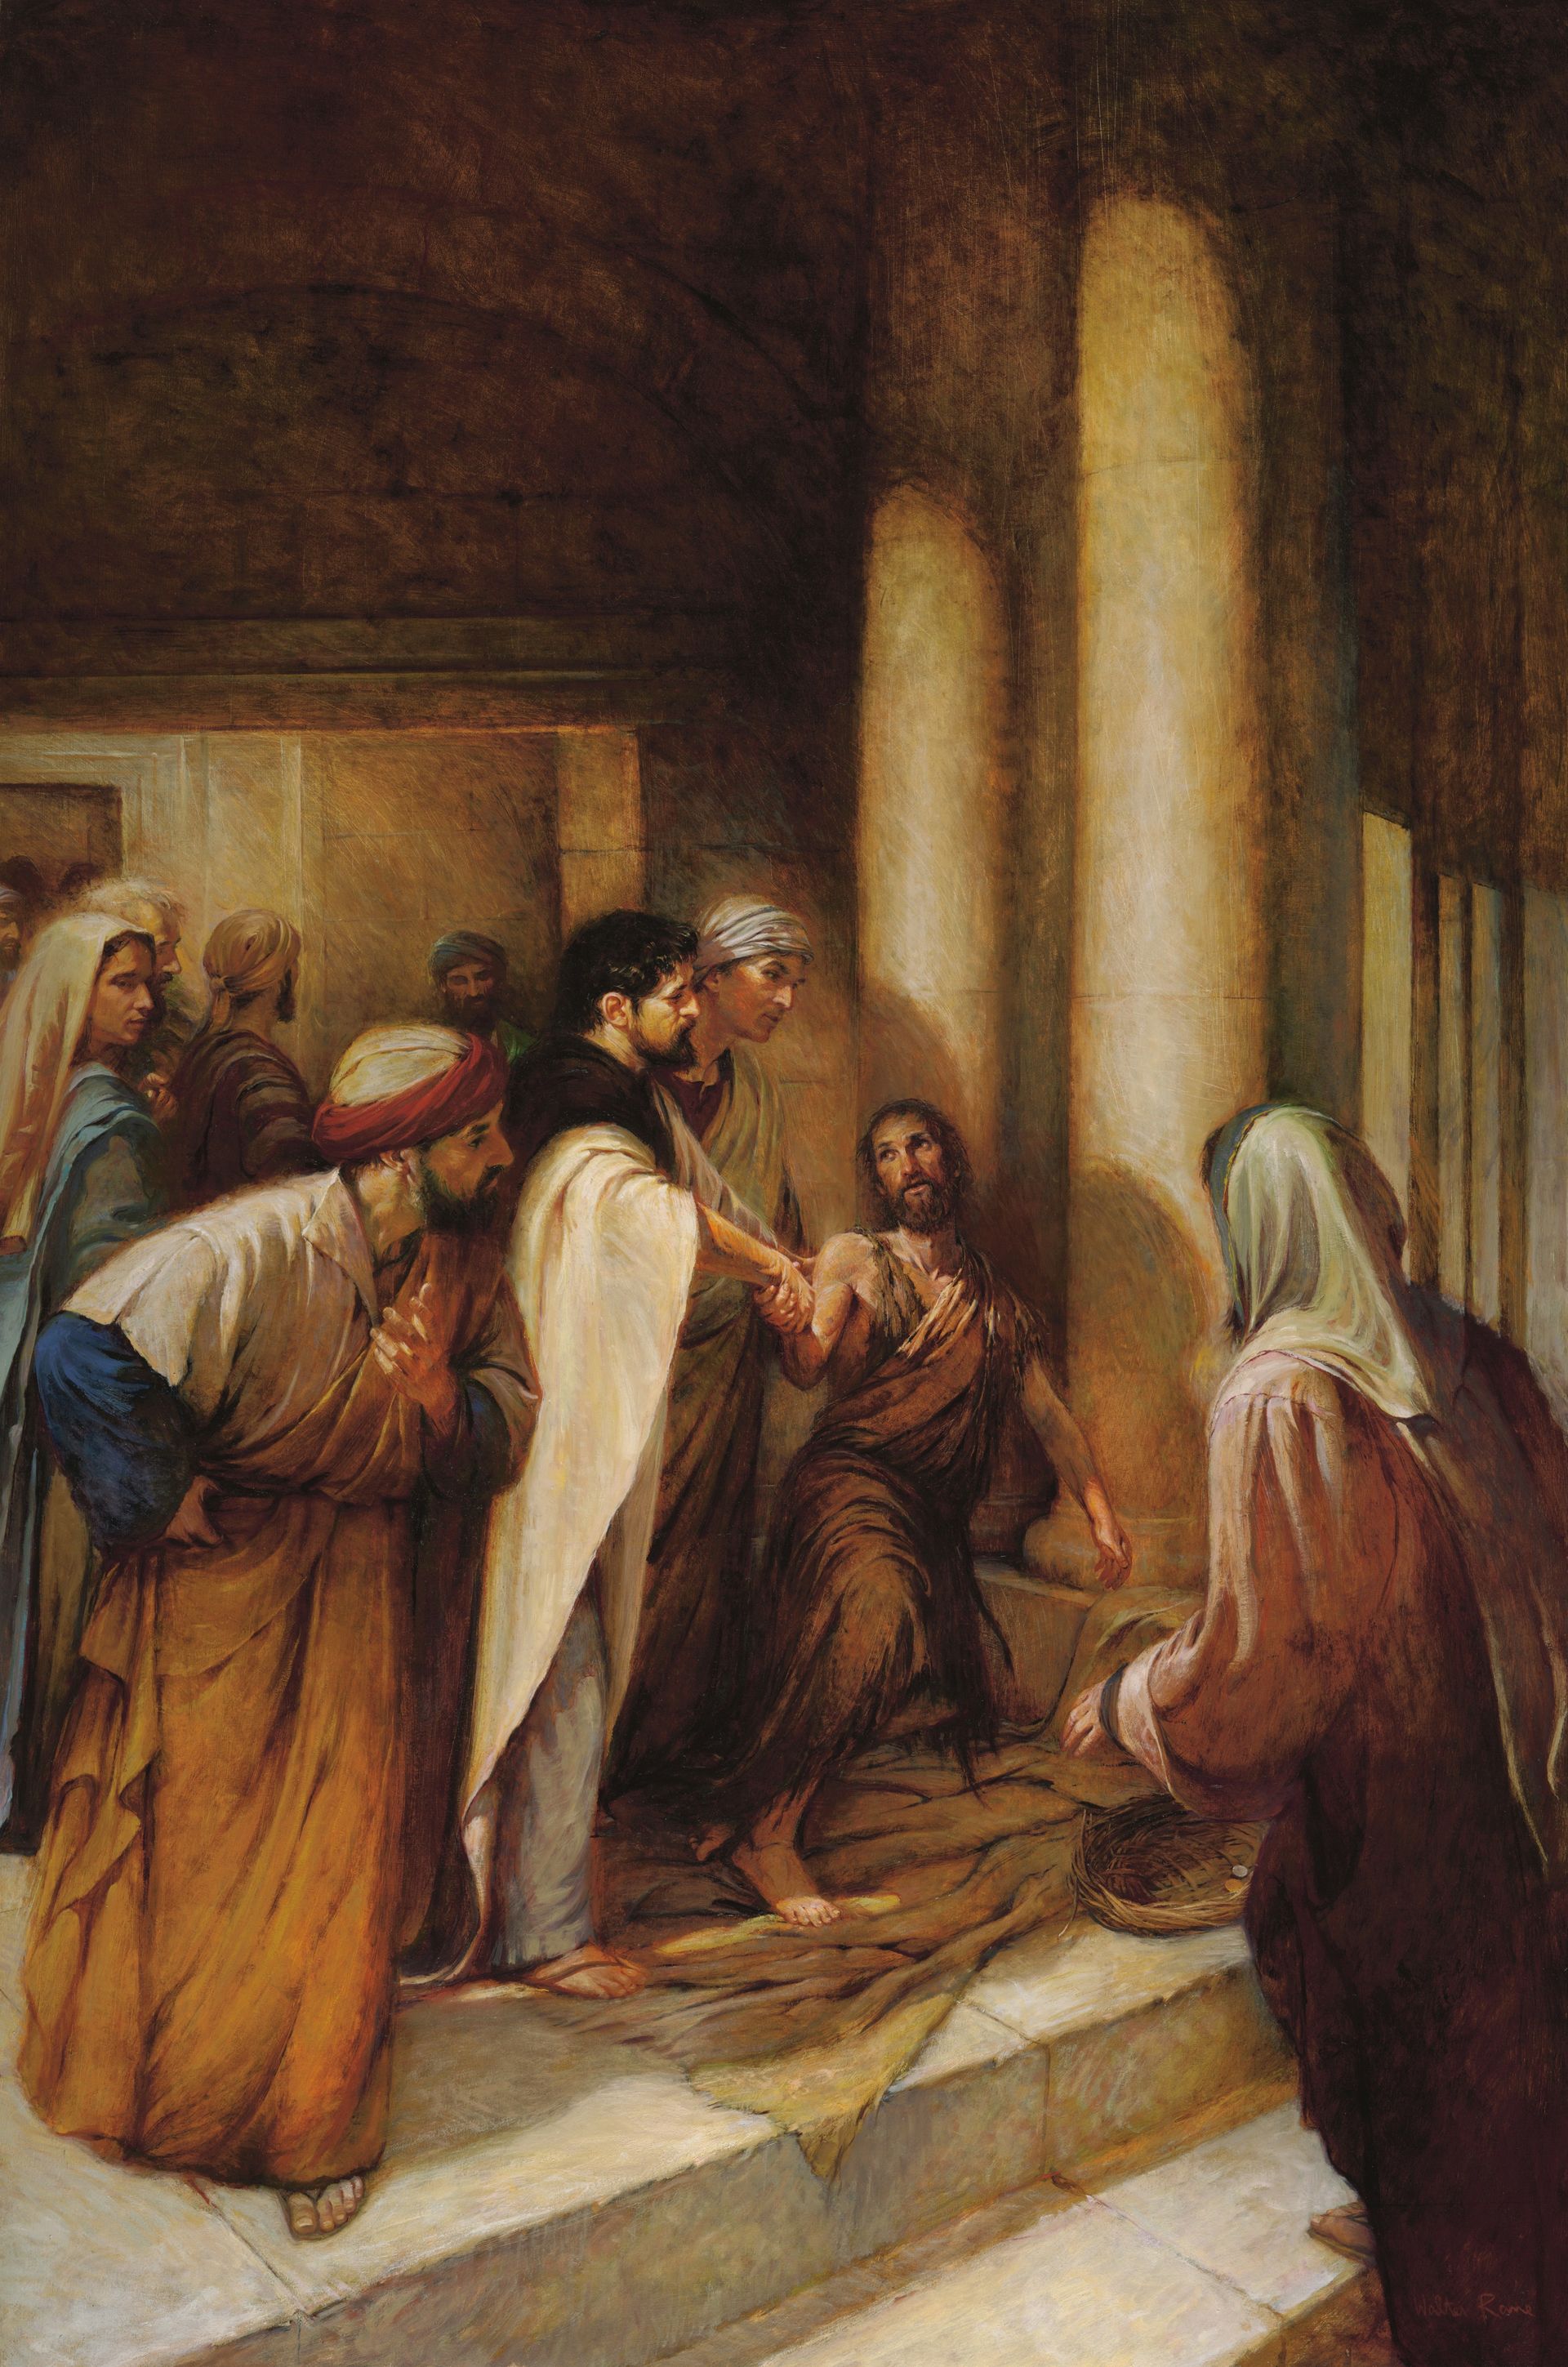 Such as I Have, I Give to Thee, by Walter Rane.